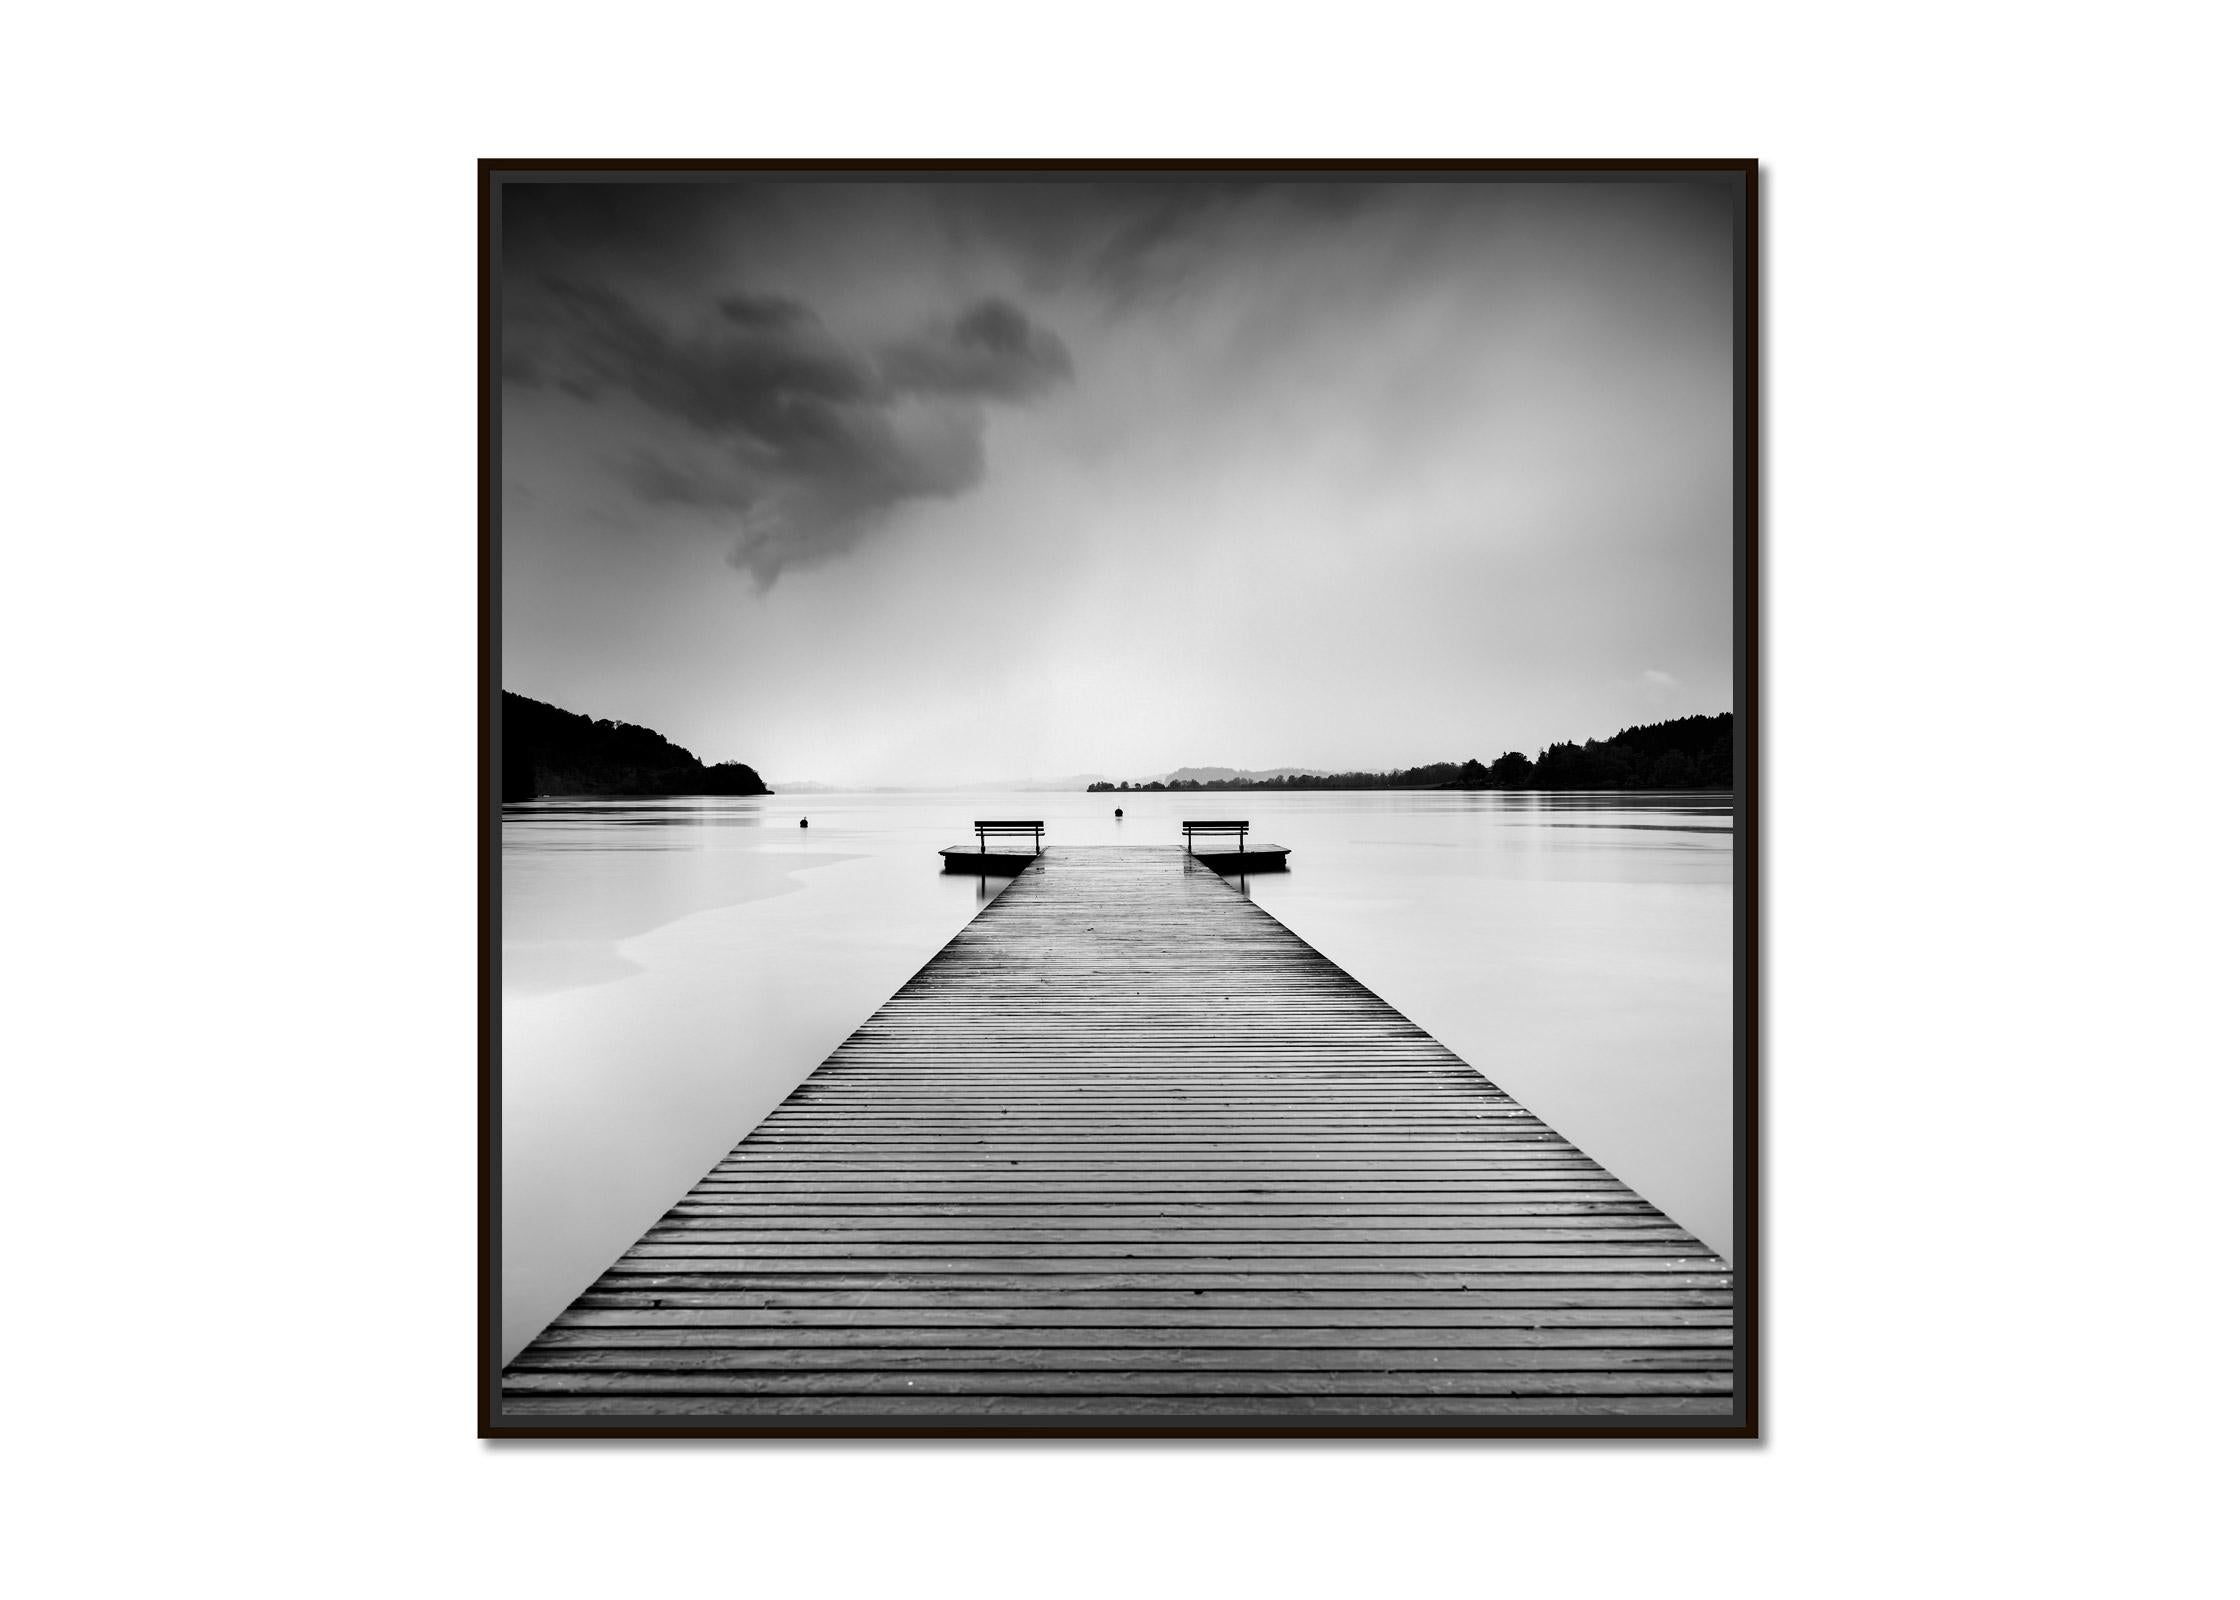 Lakeside wooden Jetty, black and white long exposure art landscape photography - Photograph by Gerald Berghammer